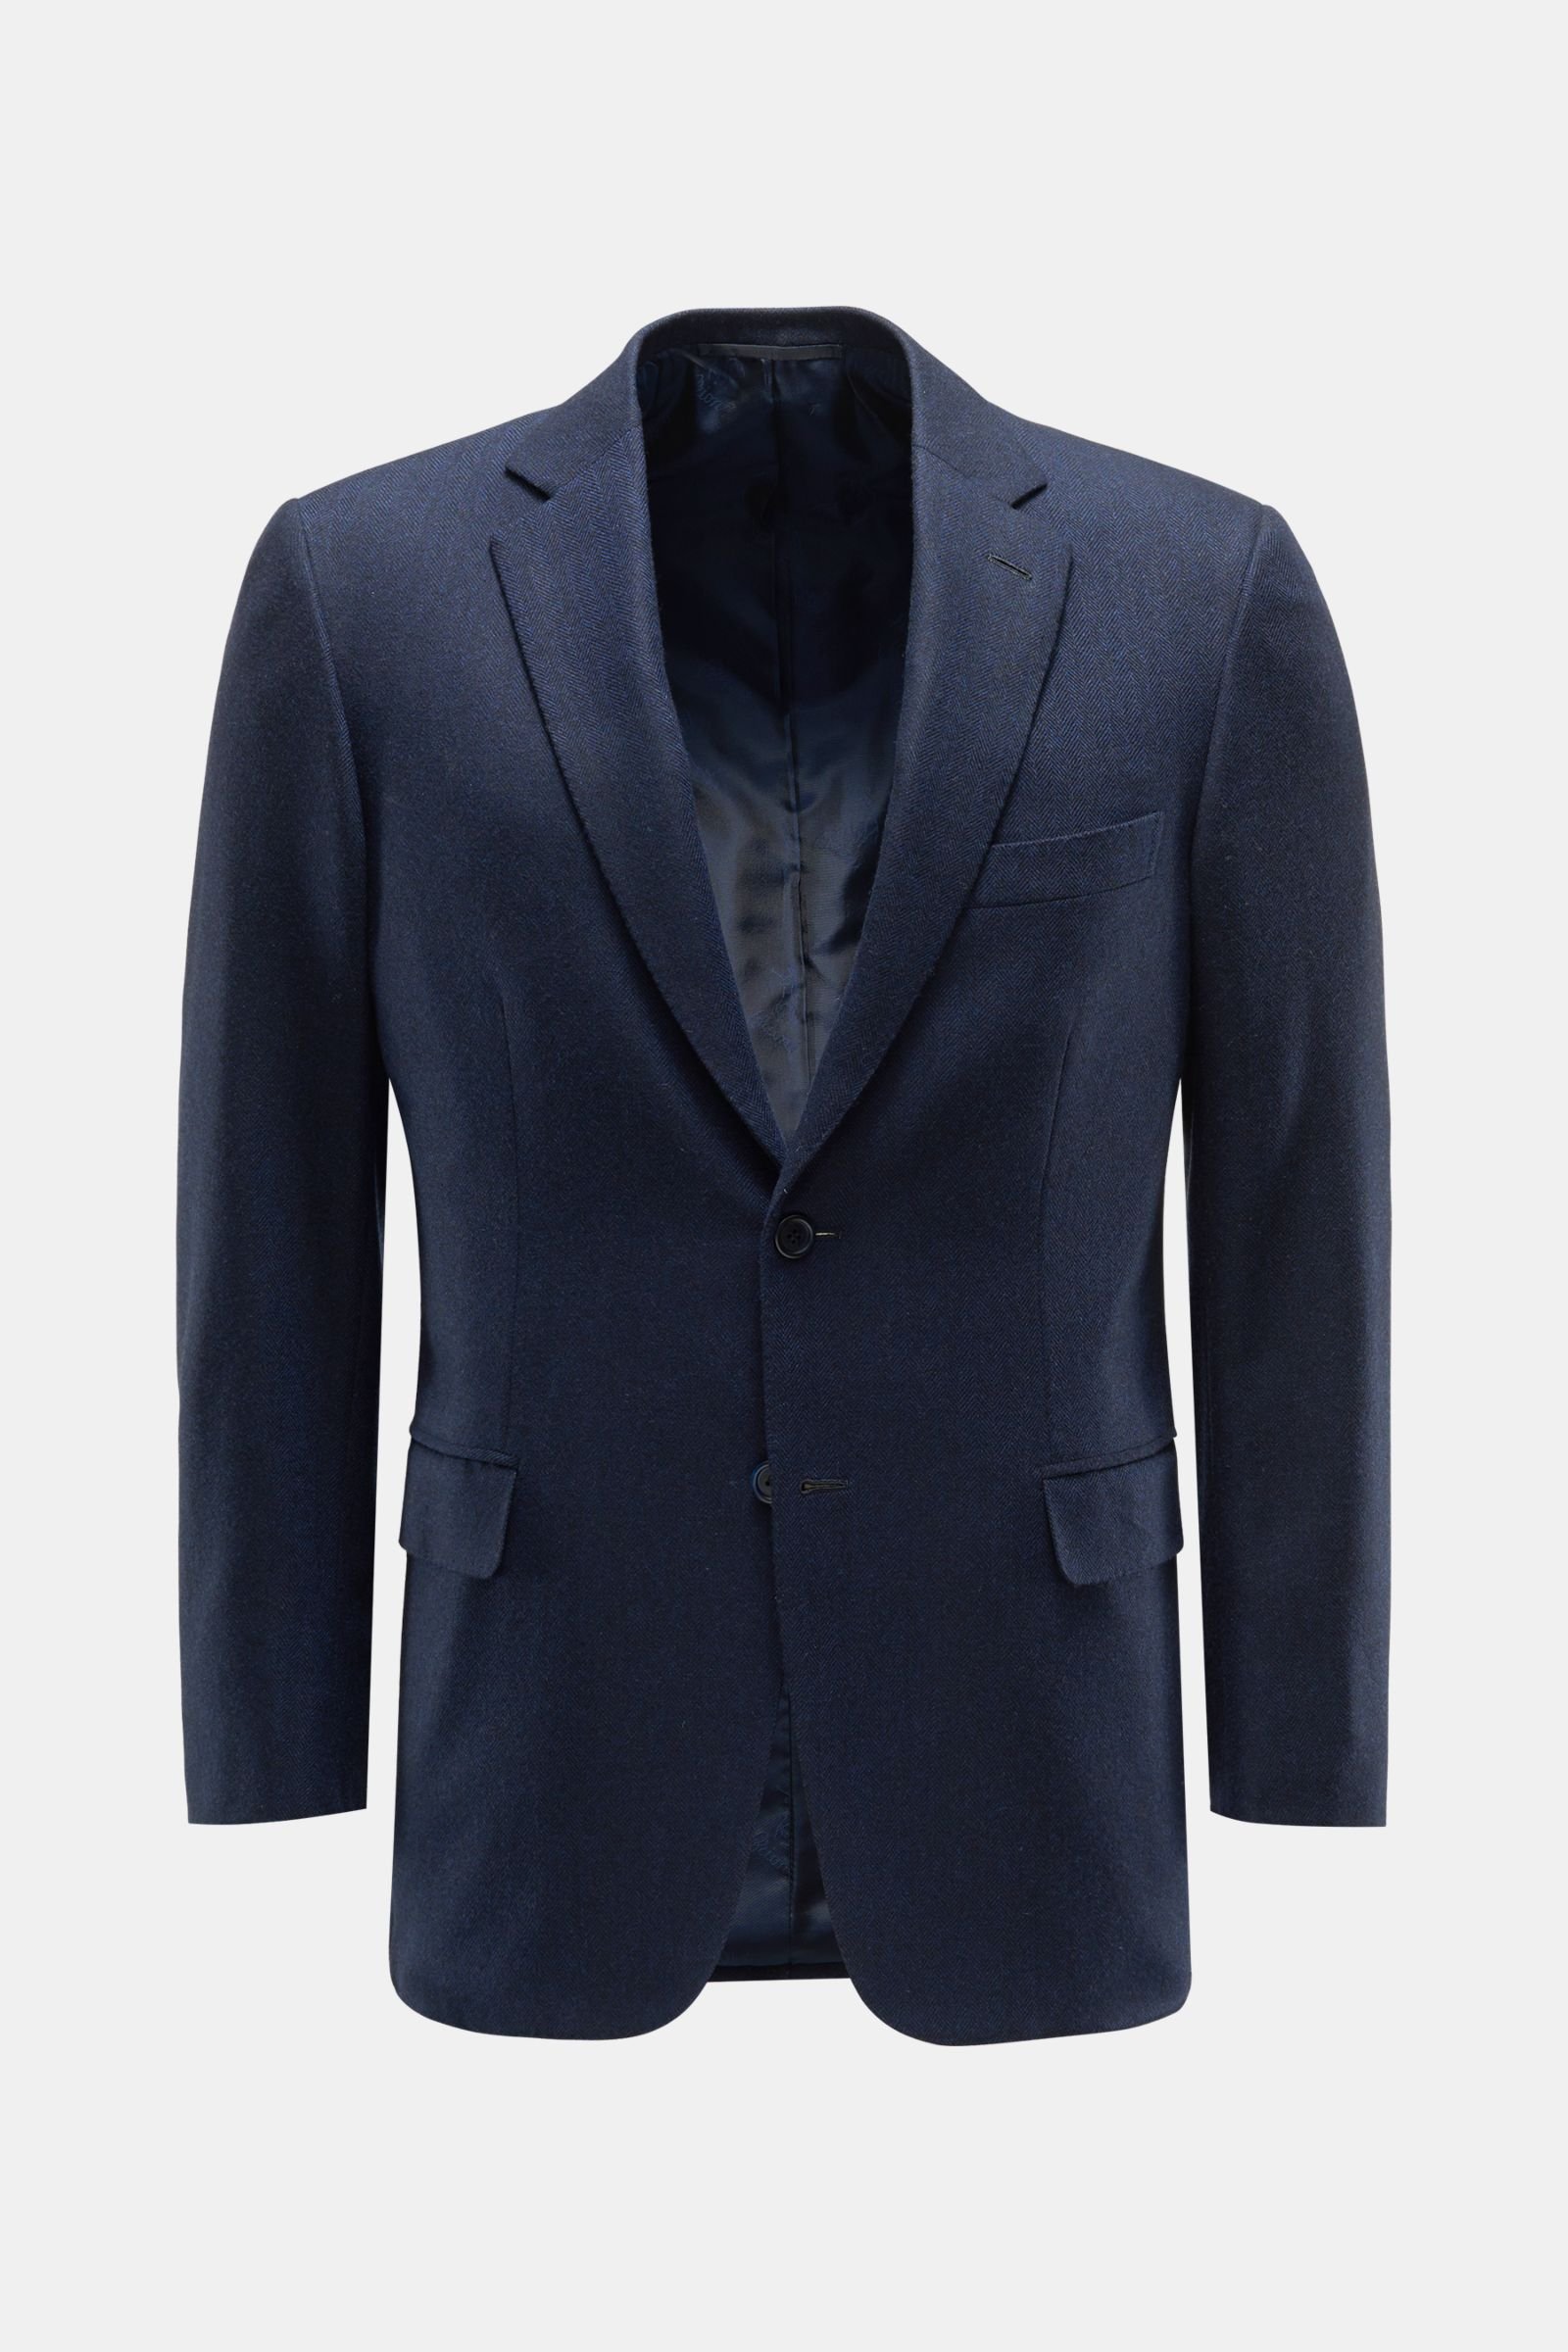 Cashmere smart-casual jacket 'Brunico' navy patterned